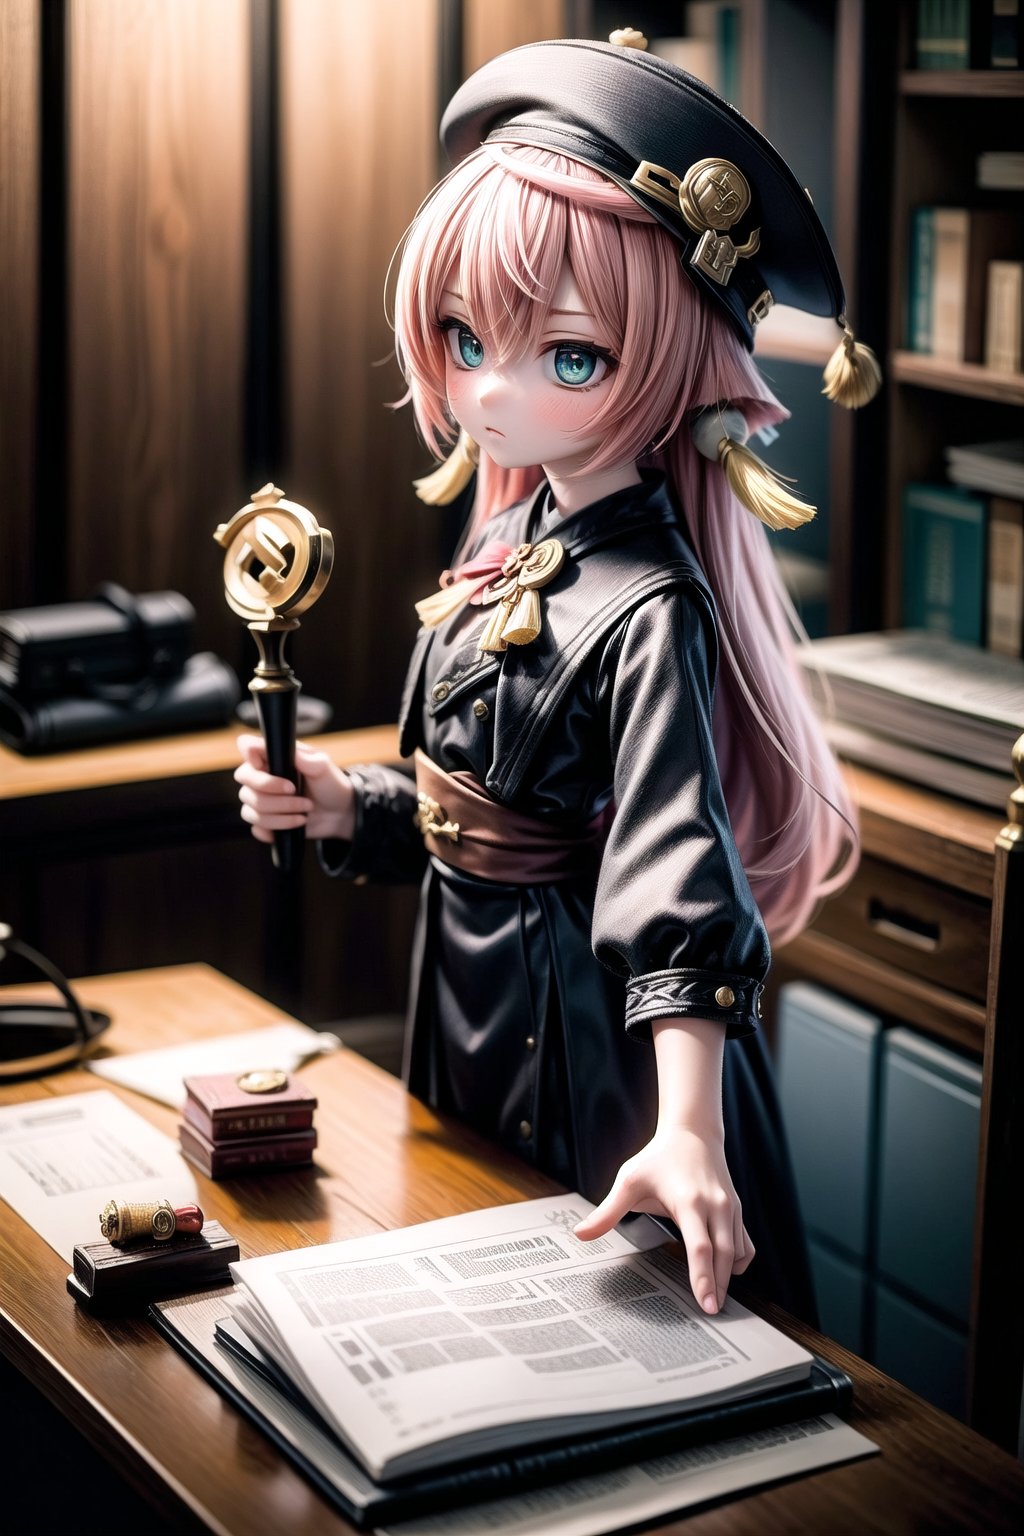 A solemn-faced yanfeidef stands tall in a dimly lit courtroom, her eyes piercing through the shadows as she holds aloft a gavel. Her dark sexy suit and stern expression command respect, as if ready to dispense wisdom and justice. The wooden desk behind her is cluttered with files and papers, while the walls are adorned with ancient legal texts. photorealistic,